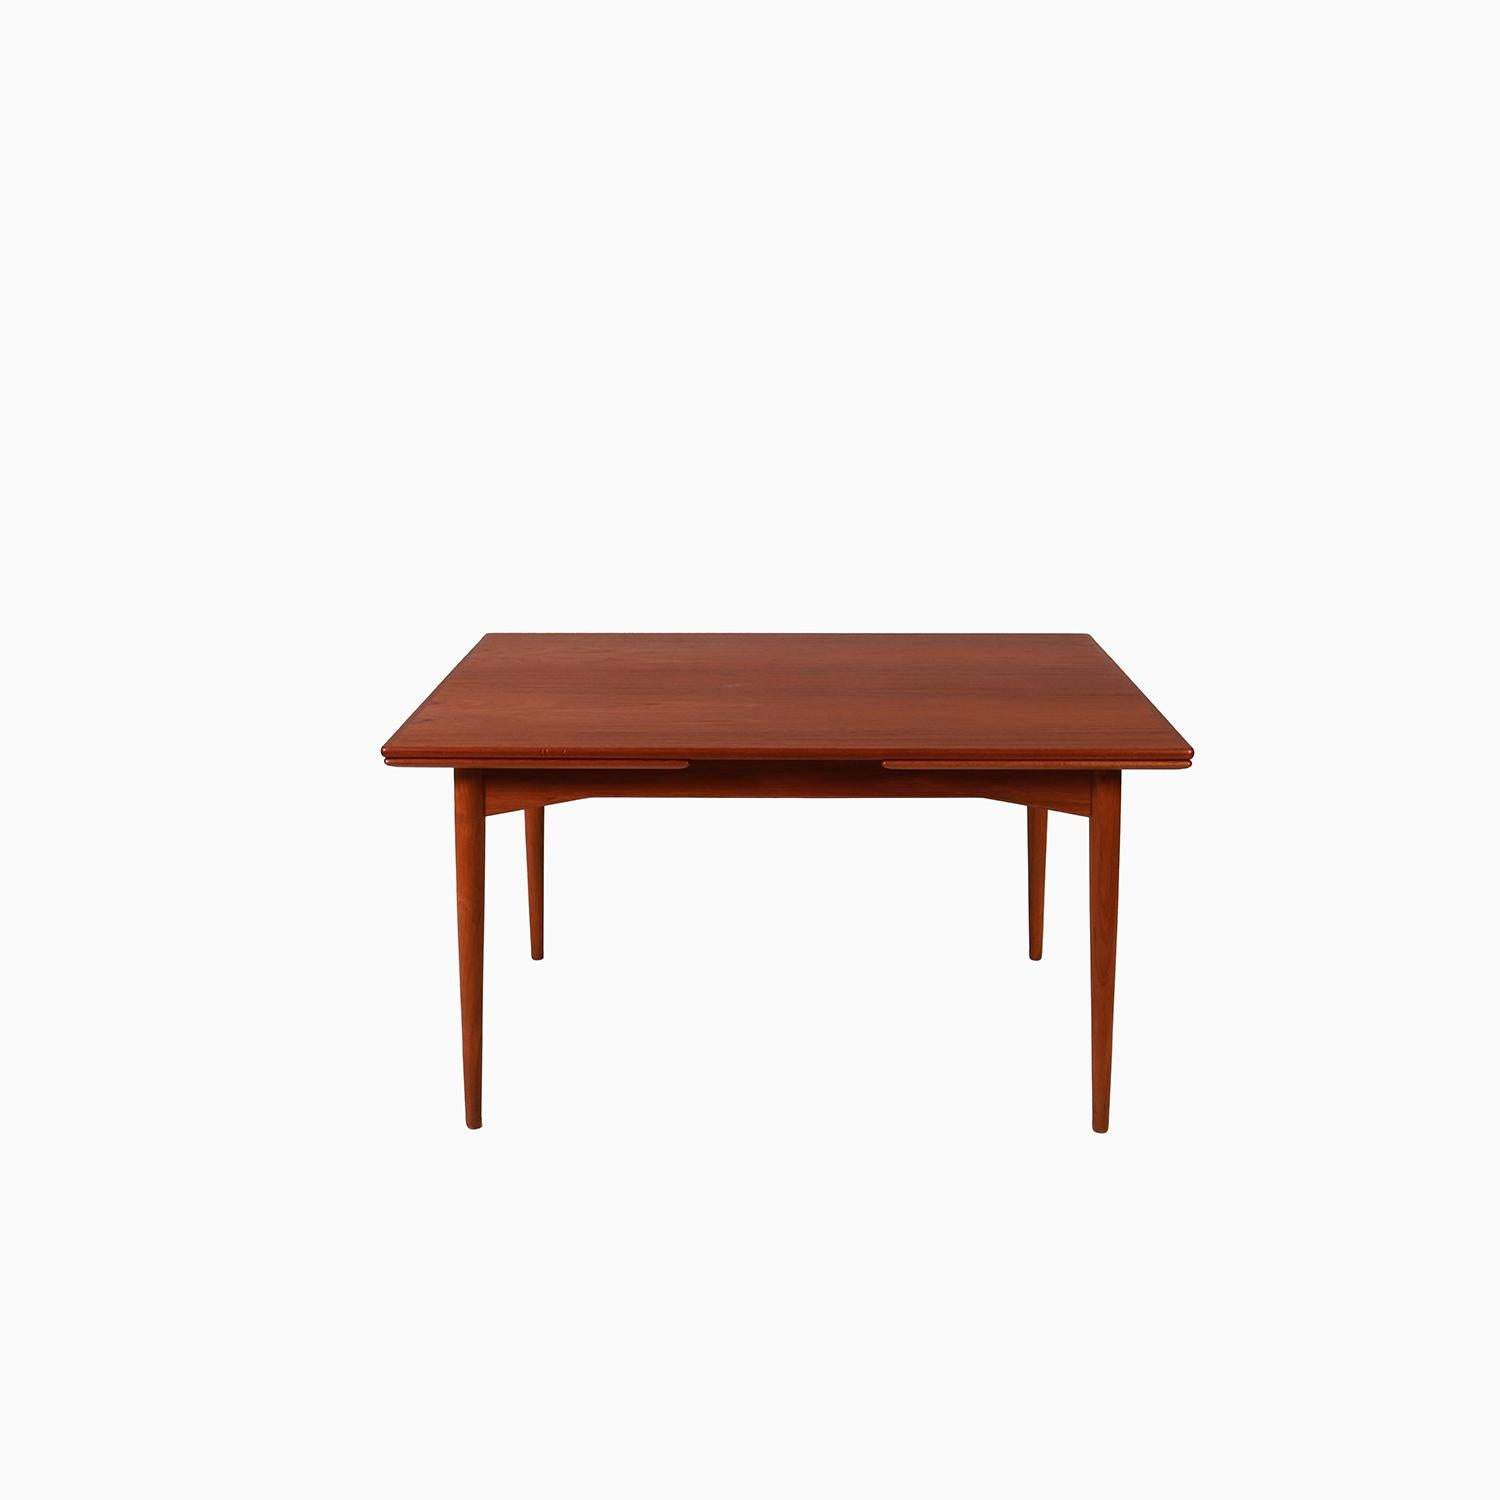 A Danish Modern extension table designed by Omann Jun. Exceptional details and quality. Beautiful book matched teak and a subtle angular apron. Restored condition.

Professional, skilled furniture restoration is an integral part of what we do every